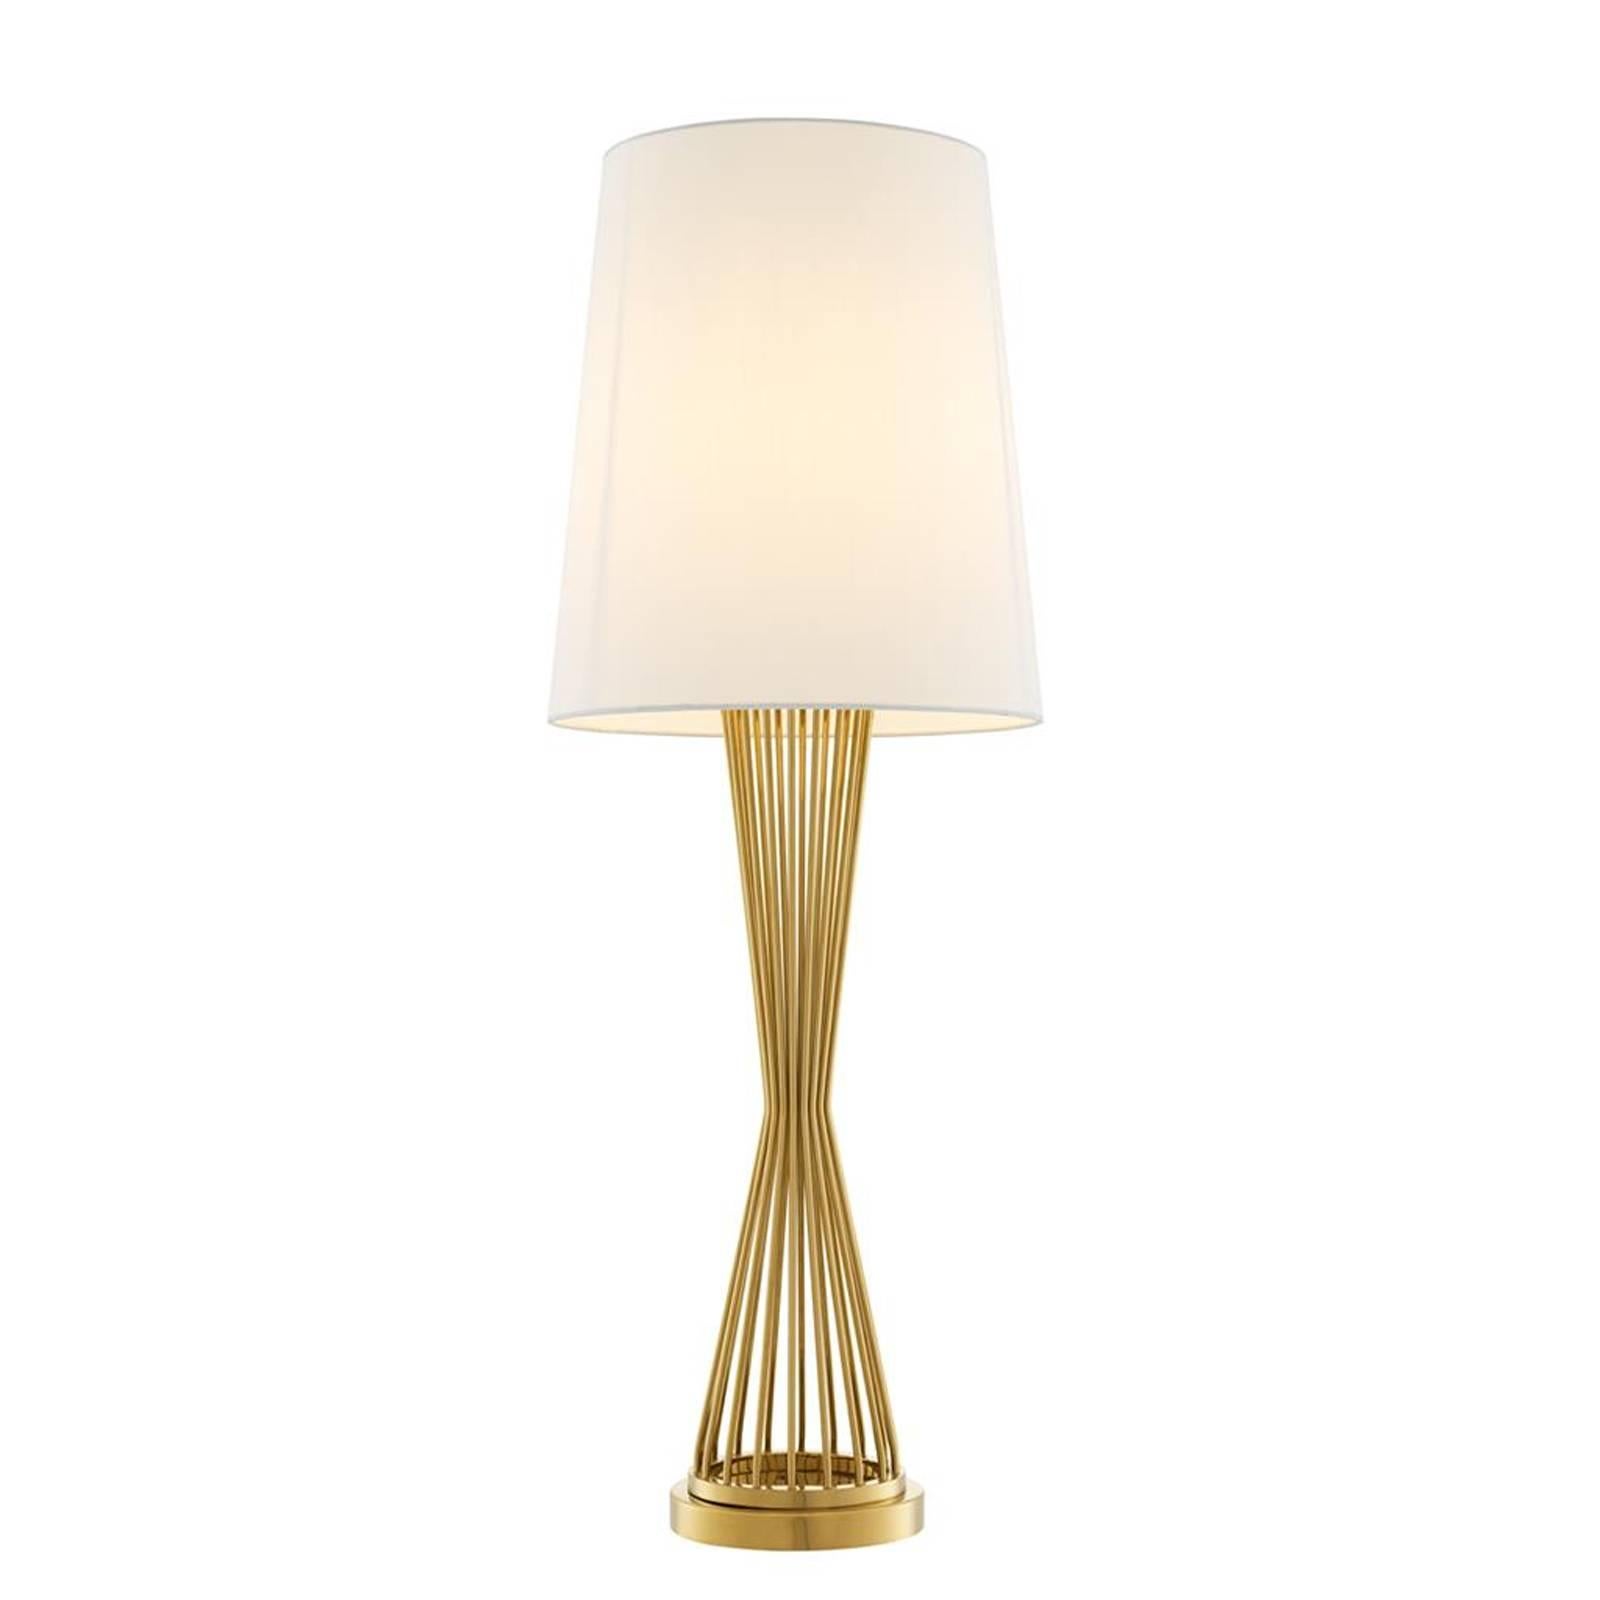 Barnet Table Lamp in Gold or Nickel Finish